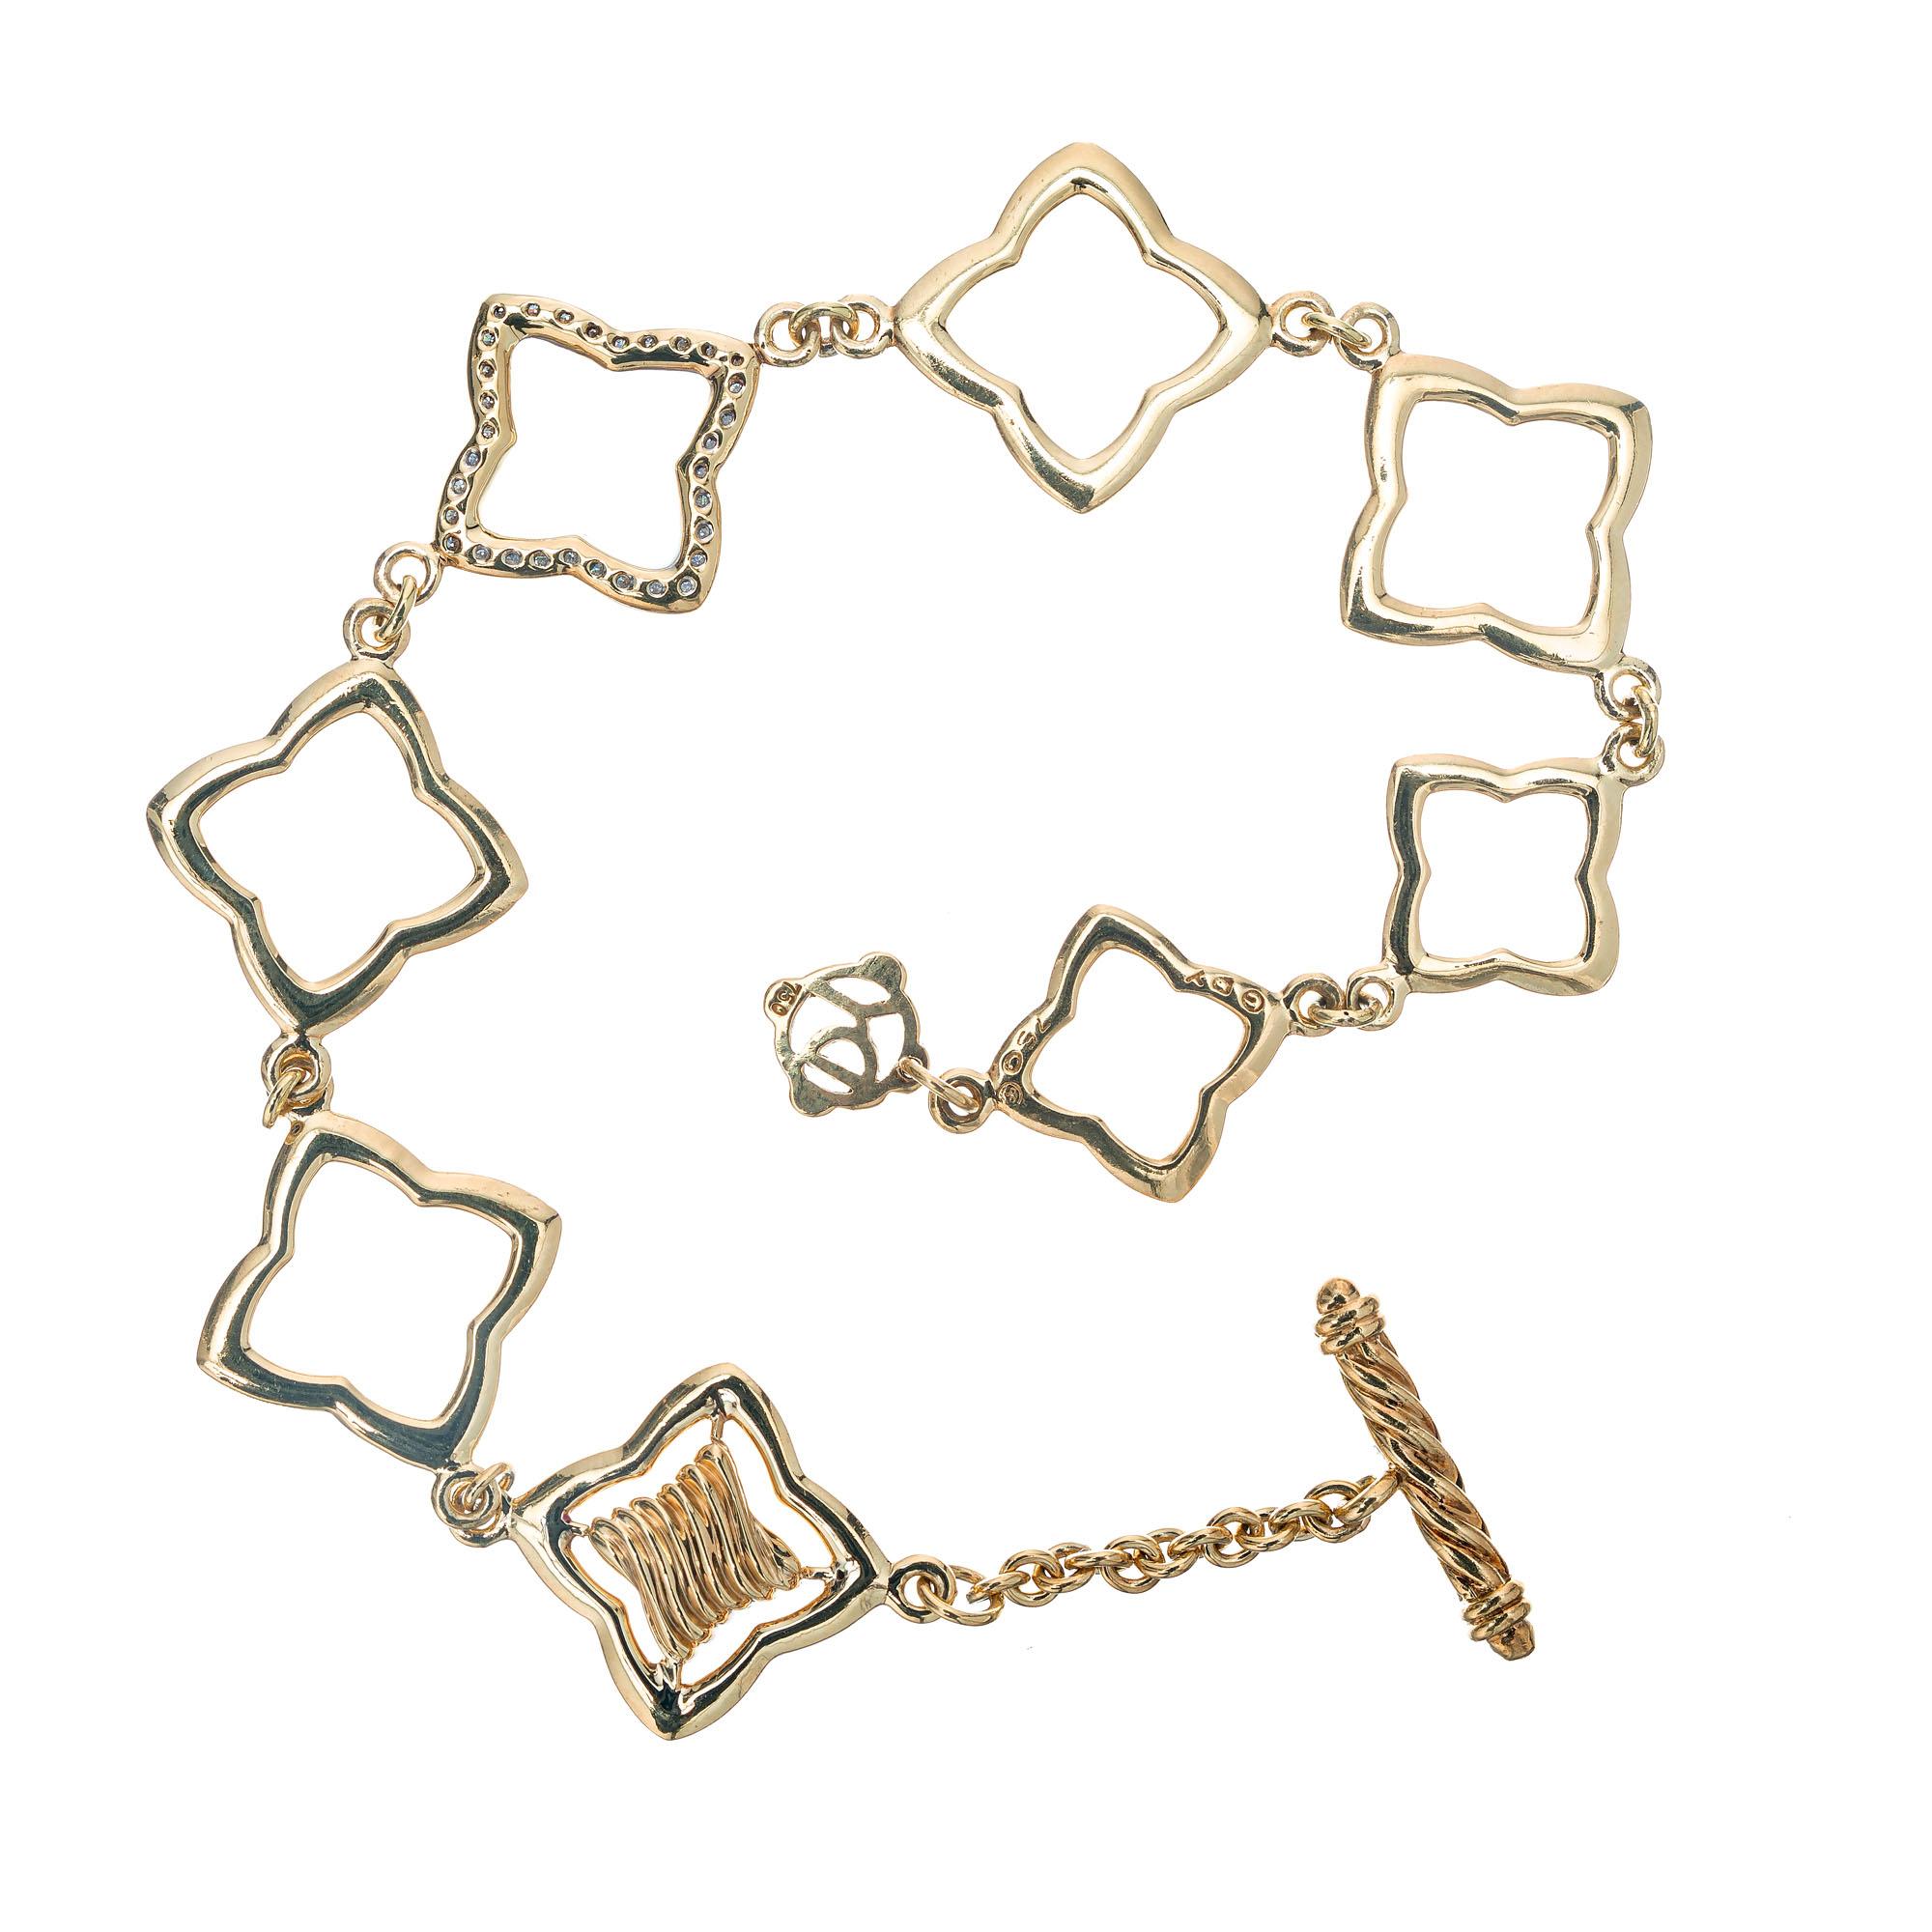 Authentic David Yurman solid 18k gold 8 link toggle diamond quatrefoil bracelet. 7.75 inches in length. 

32 full cut diamonds approx. total weight .32cts, G, VS
D Y tag
Stamped: D Y 750
Length: 7 3/4 inches
Width: 5/8 inch or 17.5mm
Fits a standard